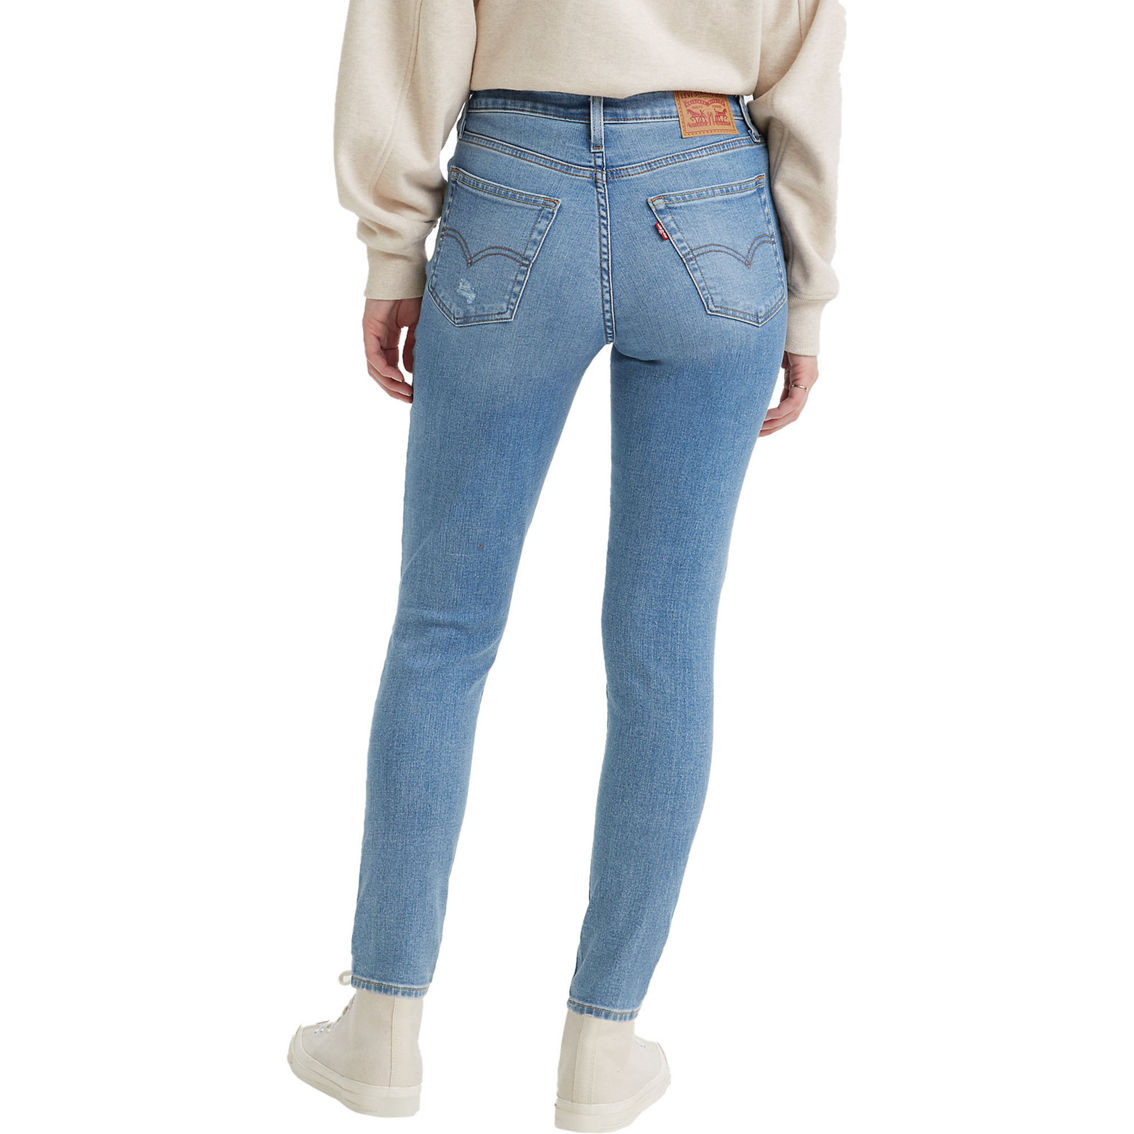 Levi's 721 High-Rise Skinny Jeans - Image 2 of 3